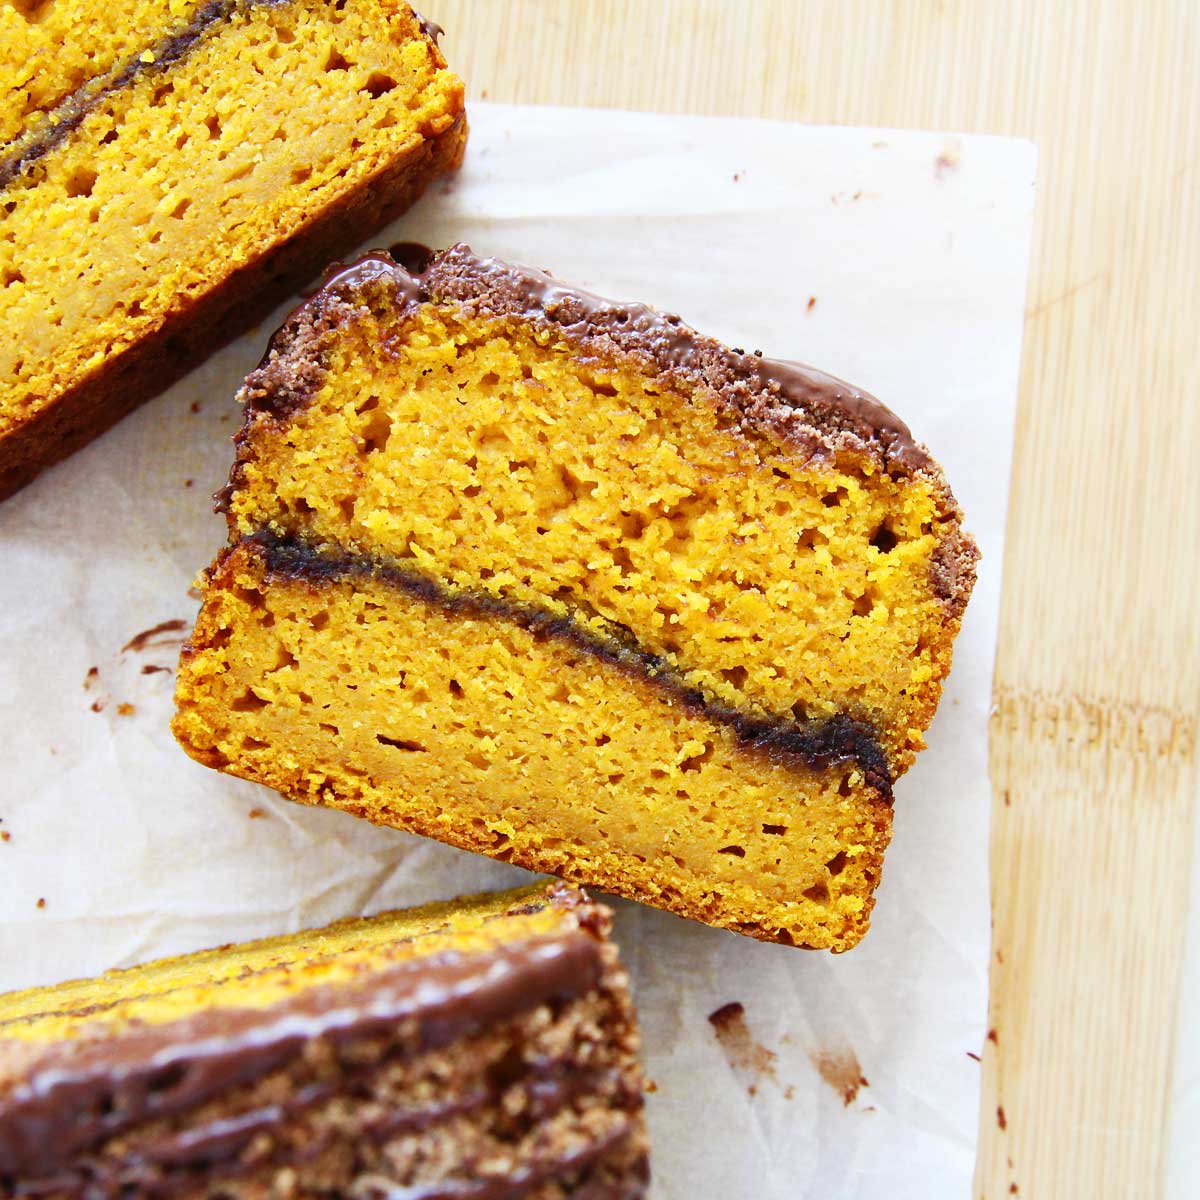 Nutella Swirl Pumpkin Bread with Chocolate Crumble Topping - Flourless Pumpkin Roll Cake